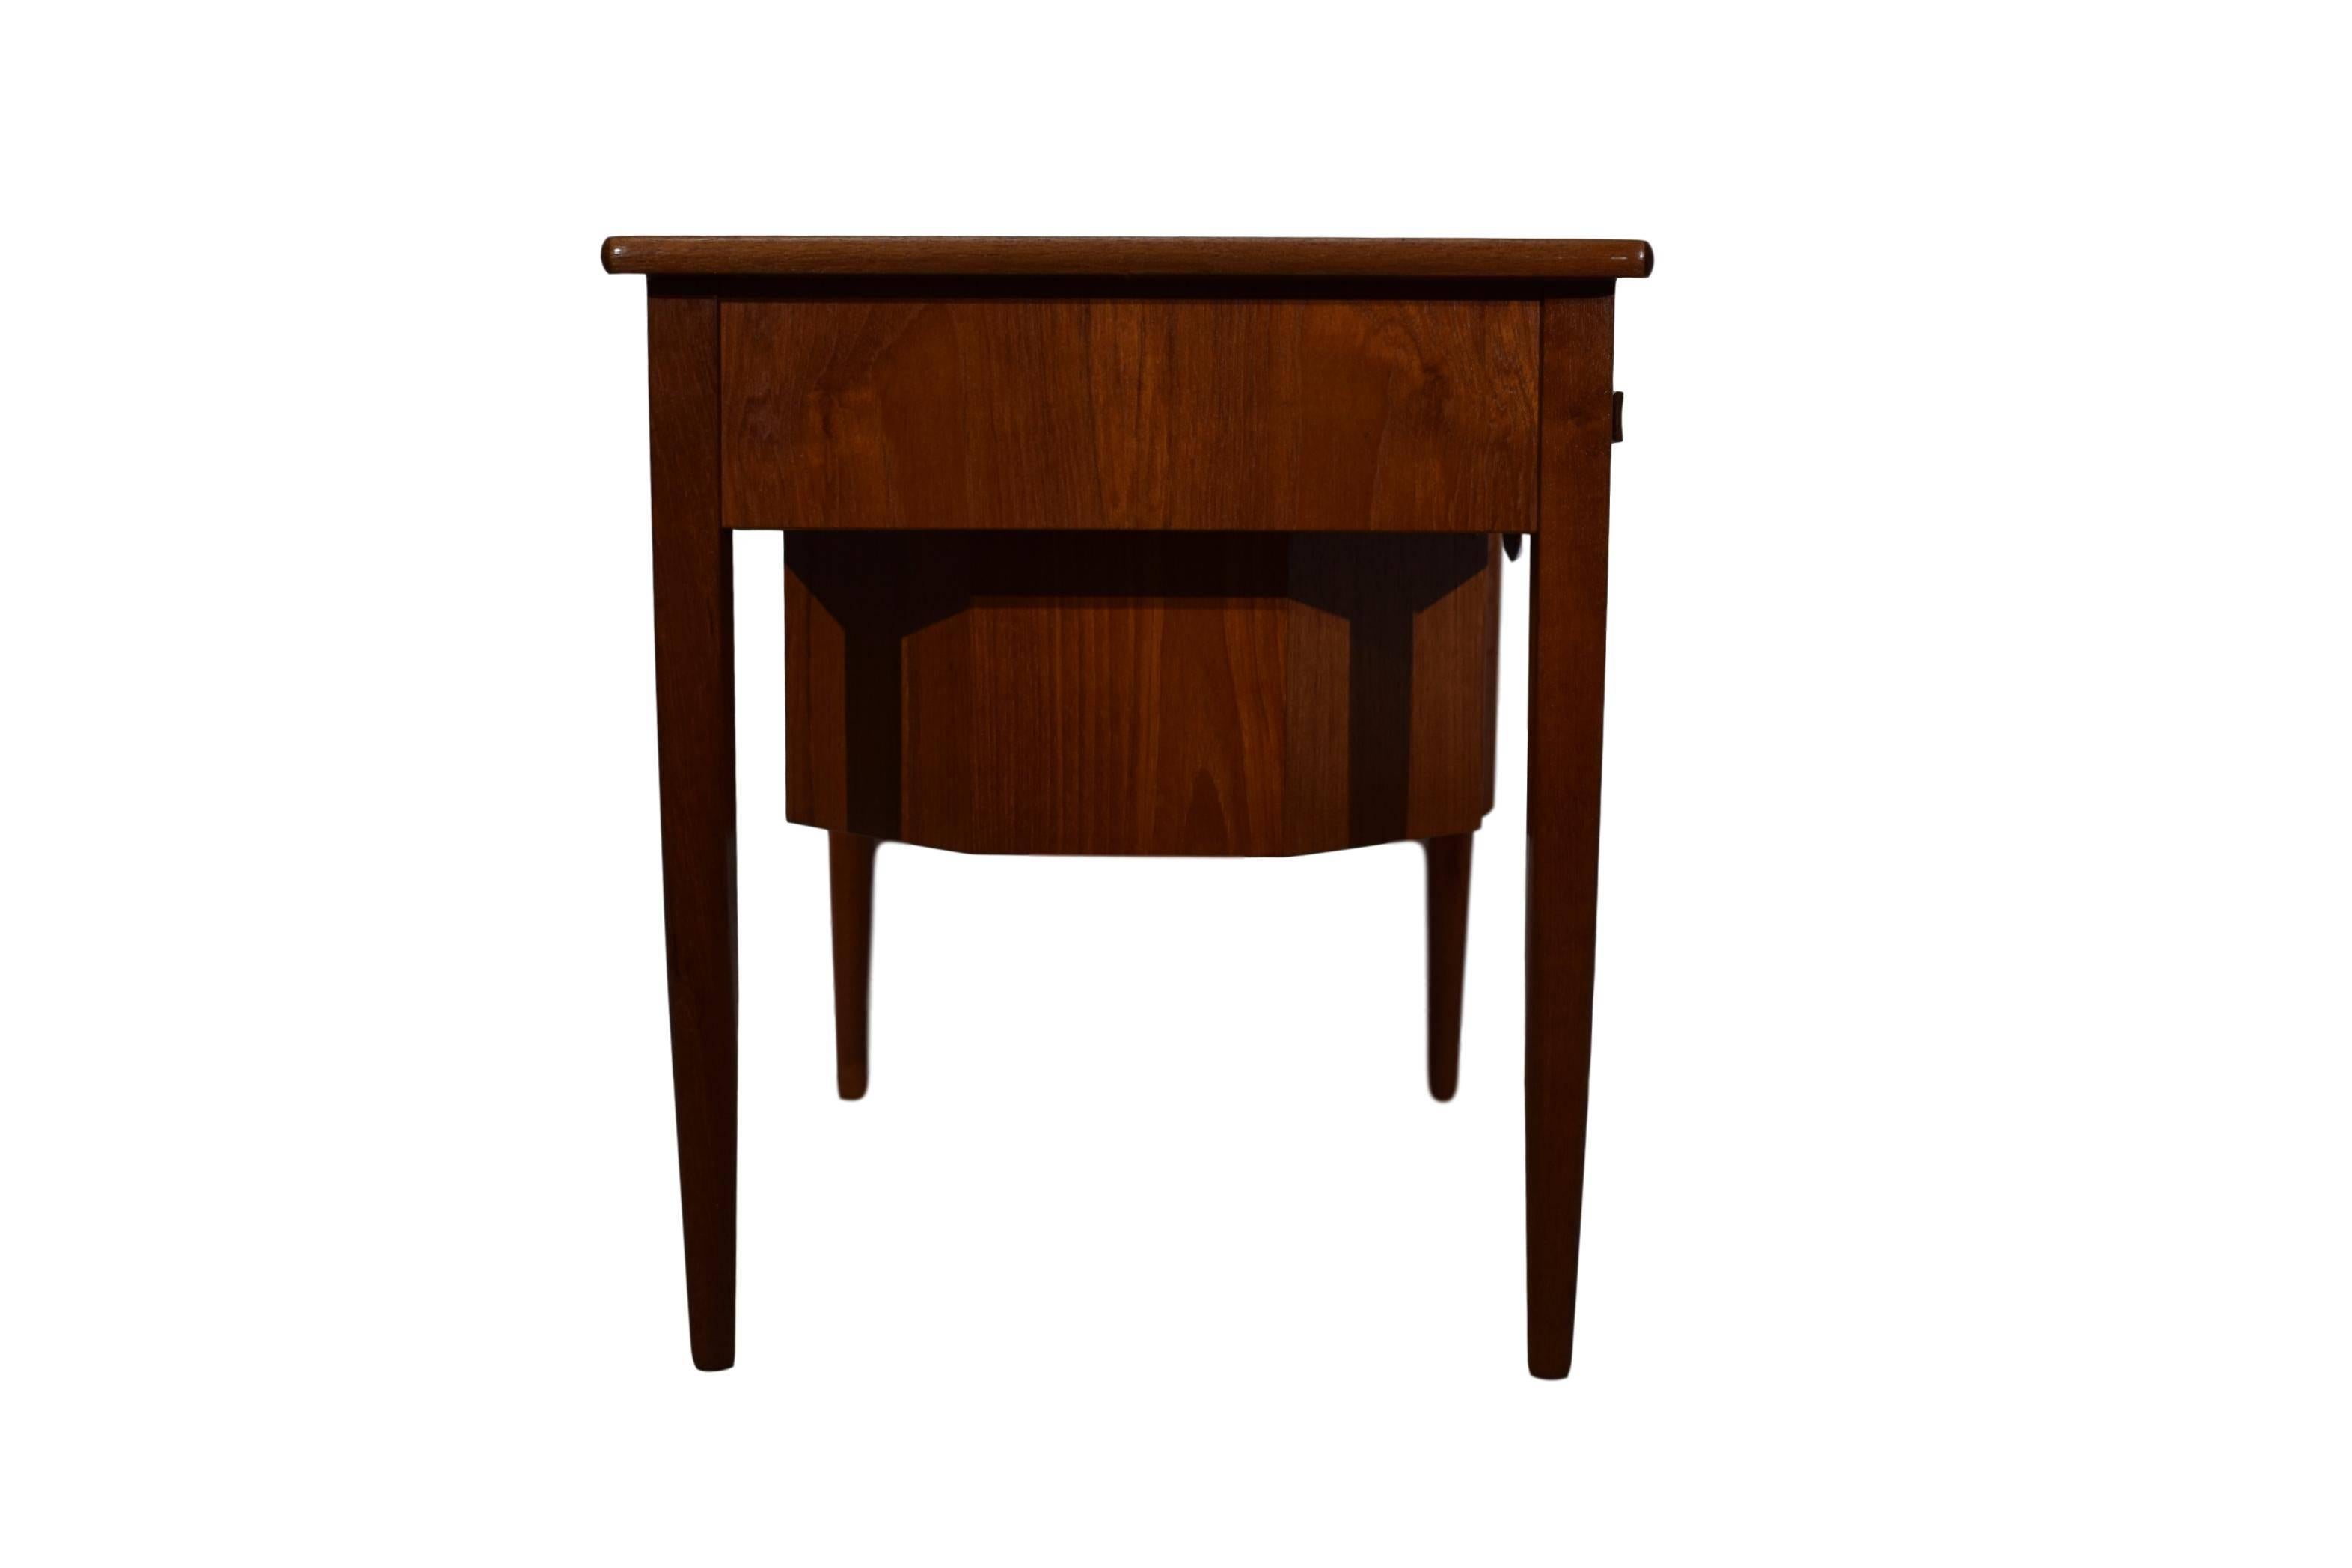 Mid-20th Century Danish Midcentury Sewing Table with Drop-Leaf by Johannes Andersen, Teak For Sale